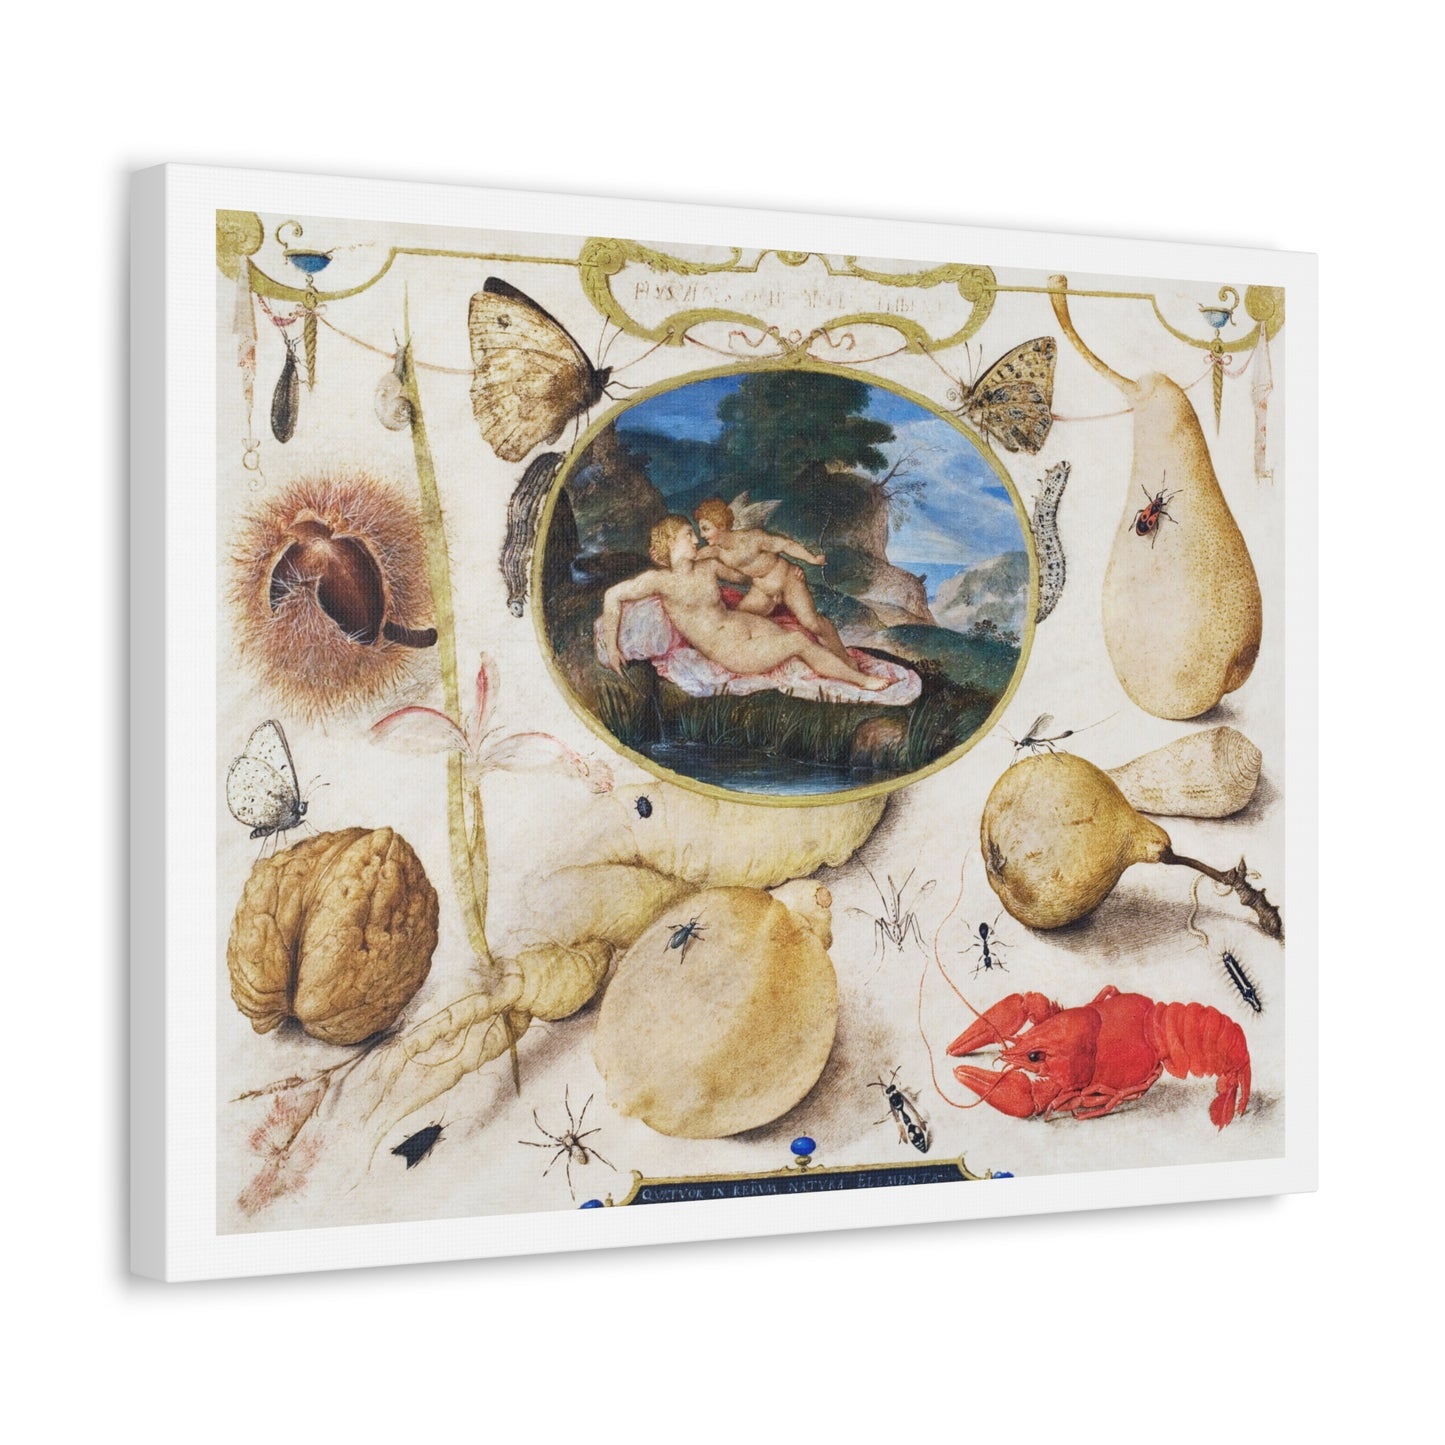 Venus Disarming Amor in a Medallion Surrounded by Plants, Fruits, Insects and Shellfish (1593–1597) by Joris Hoefnagel, from the Original, Print on Canvas